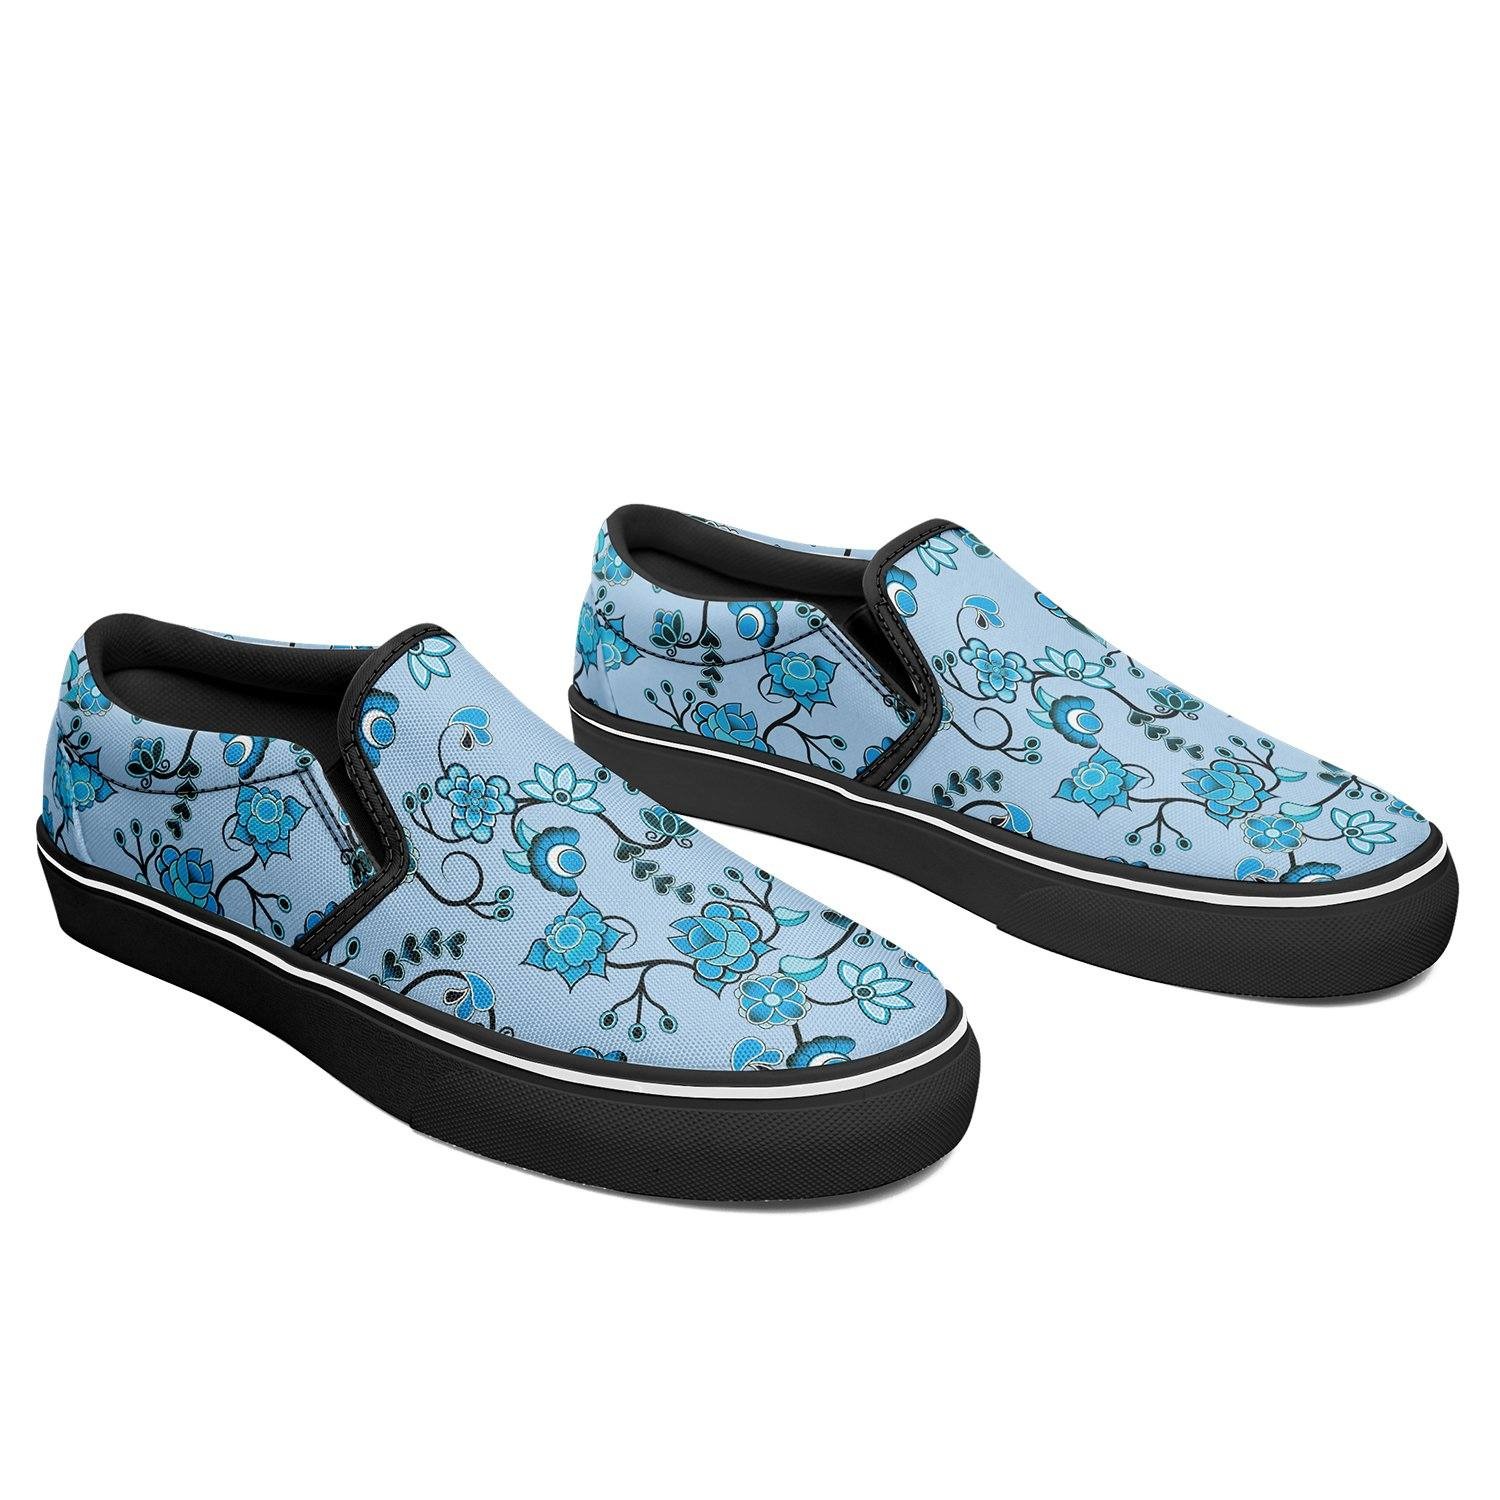 Blue Floral Amour Otoyimm Canvas Slip On Shoes